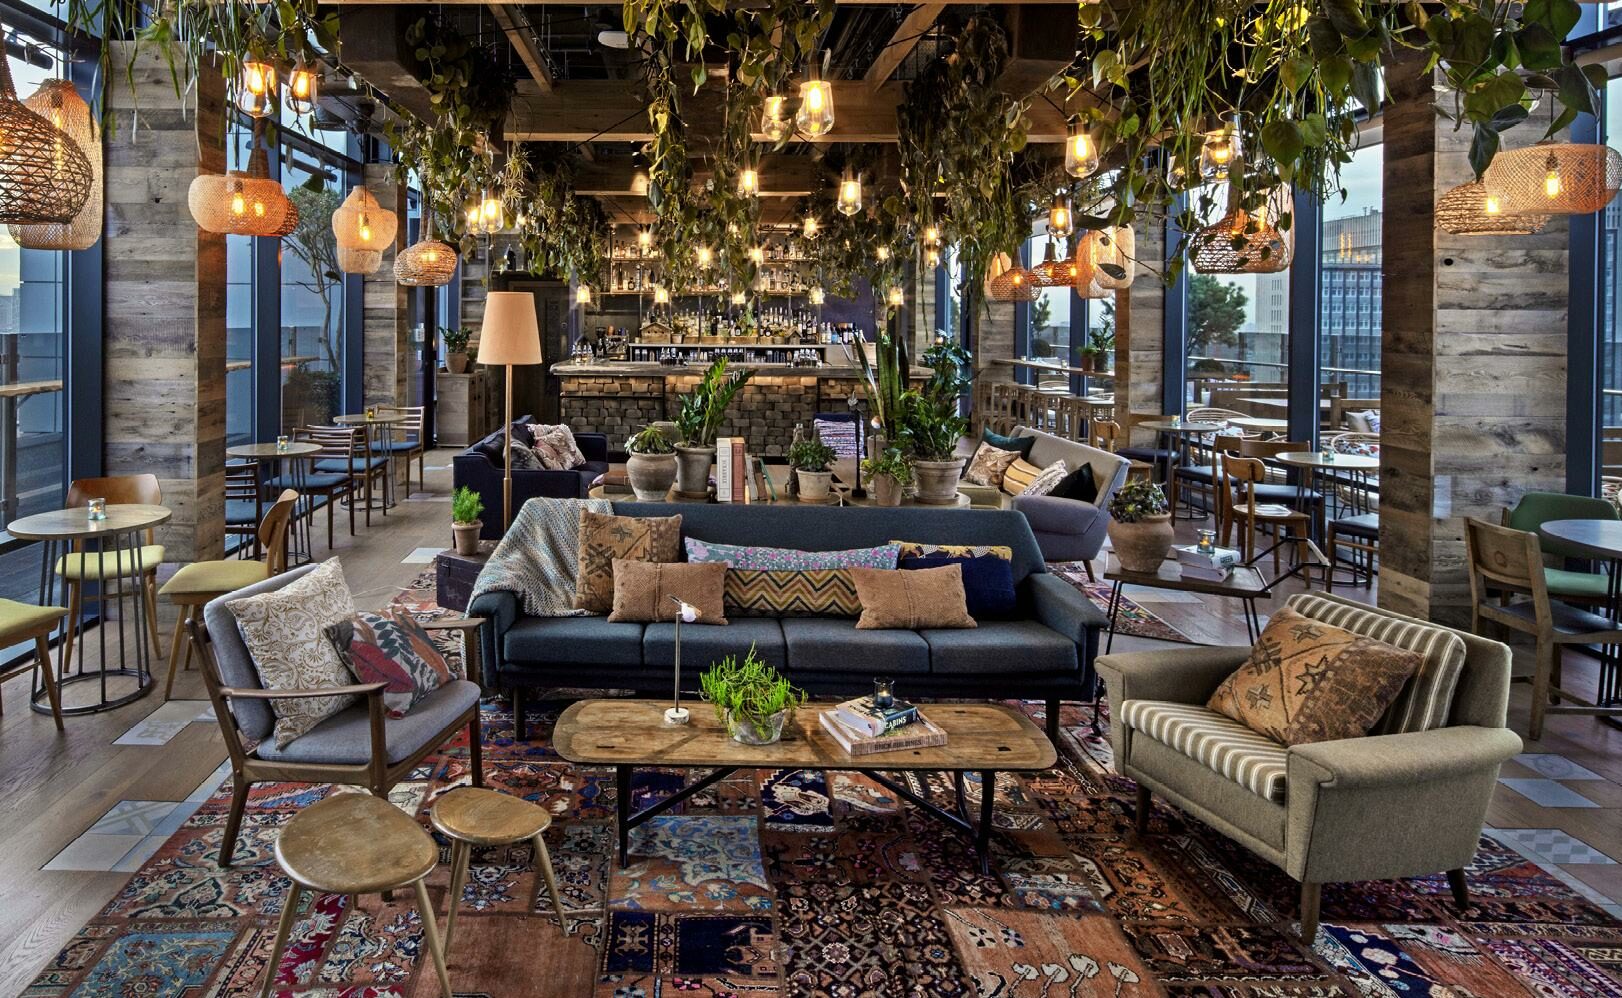 An indoor/outdoor rooftop bar with plenty of tables, comfortable sofas and chairs, patterned rugs and pillows and hanging vines.